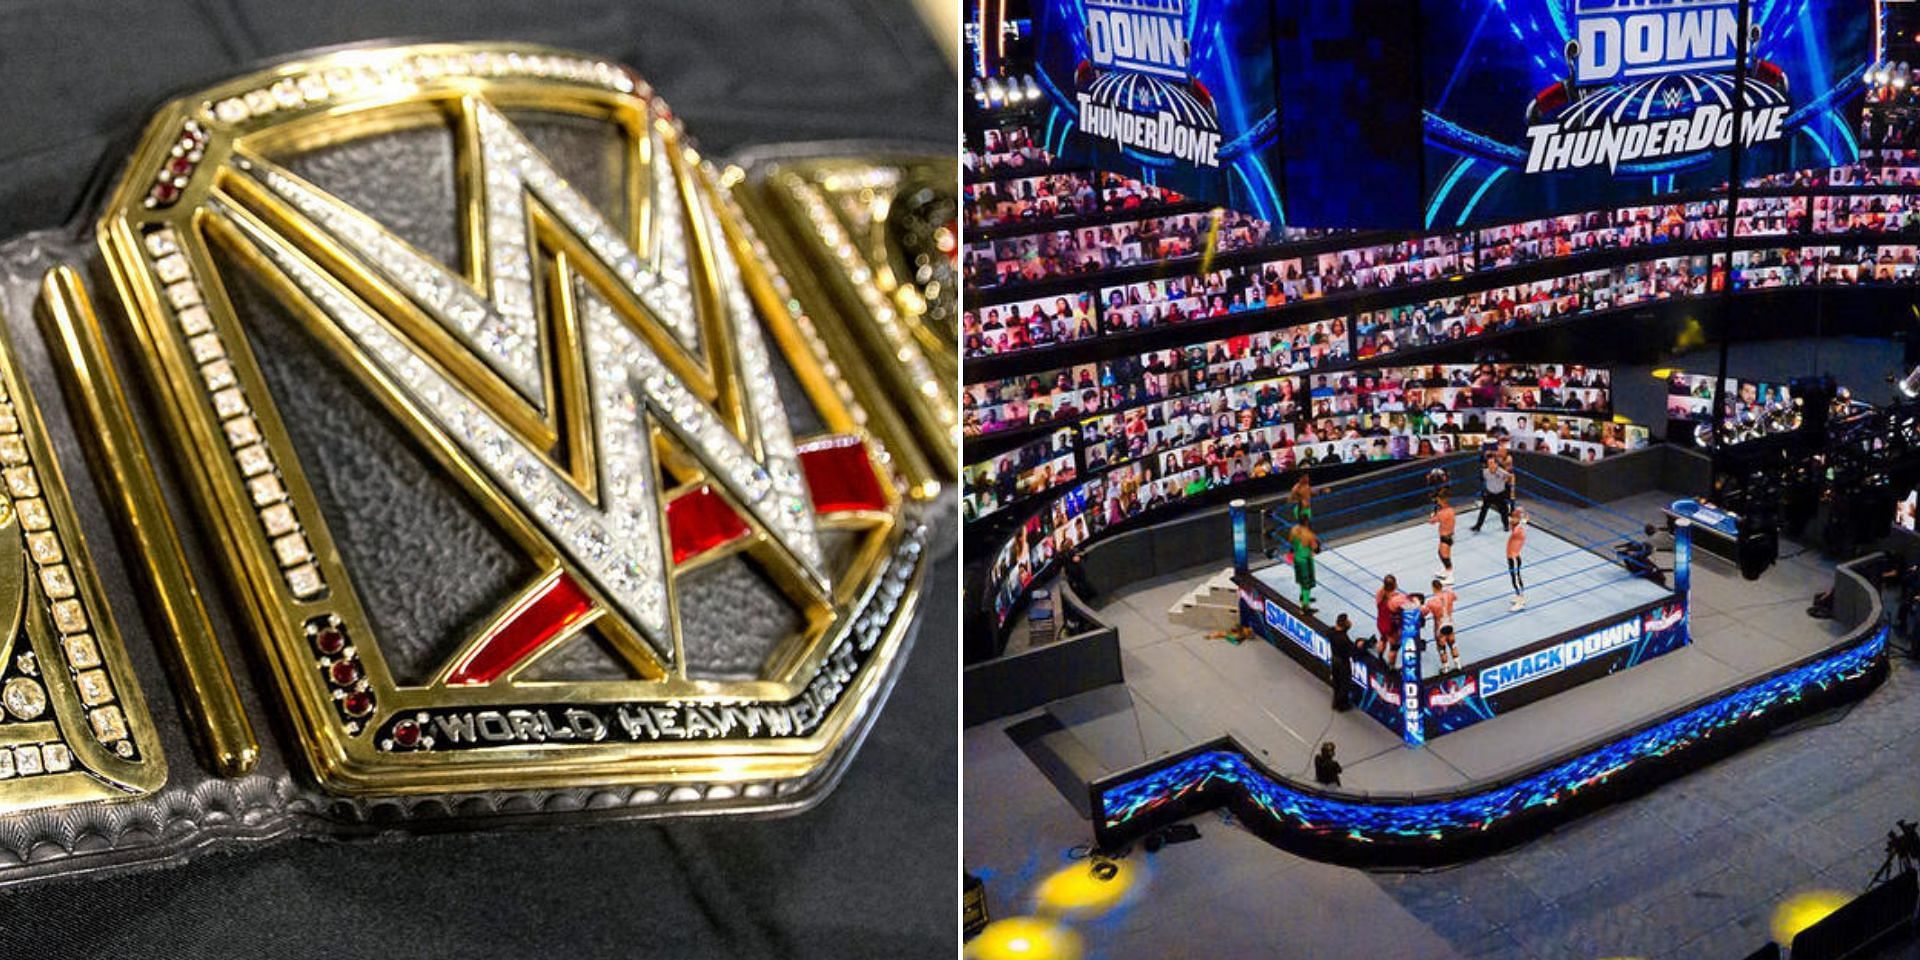 This WWE star won a title in an empty arena